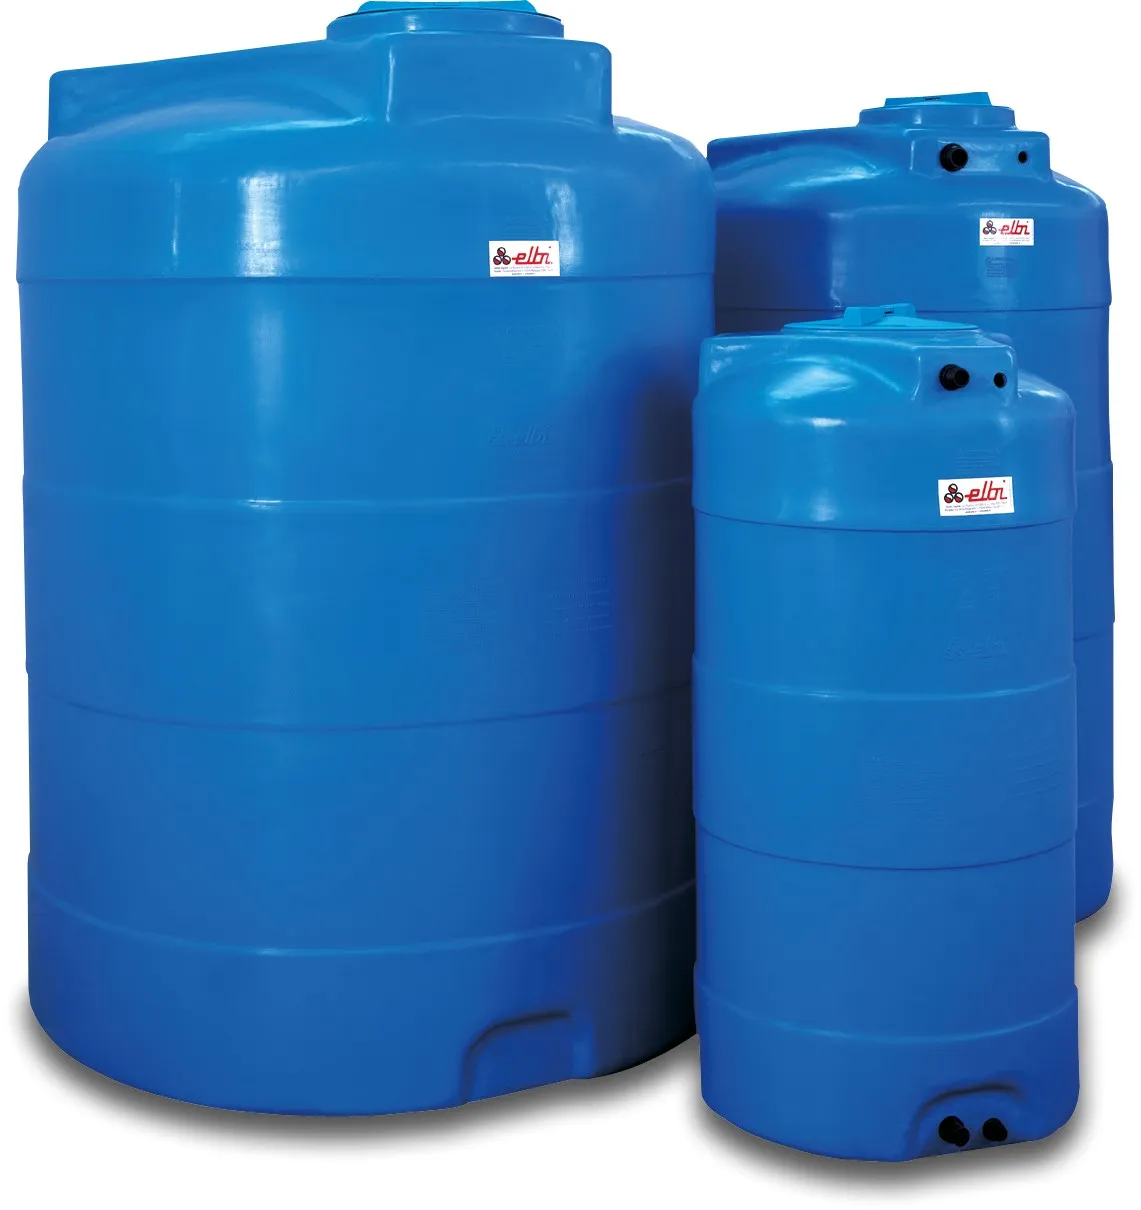 Tank LDPE blue 500ltr type CV vertical without connections